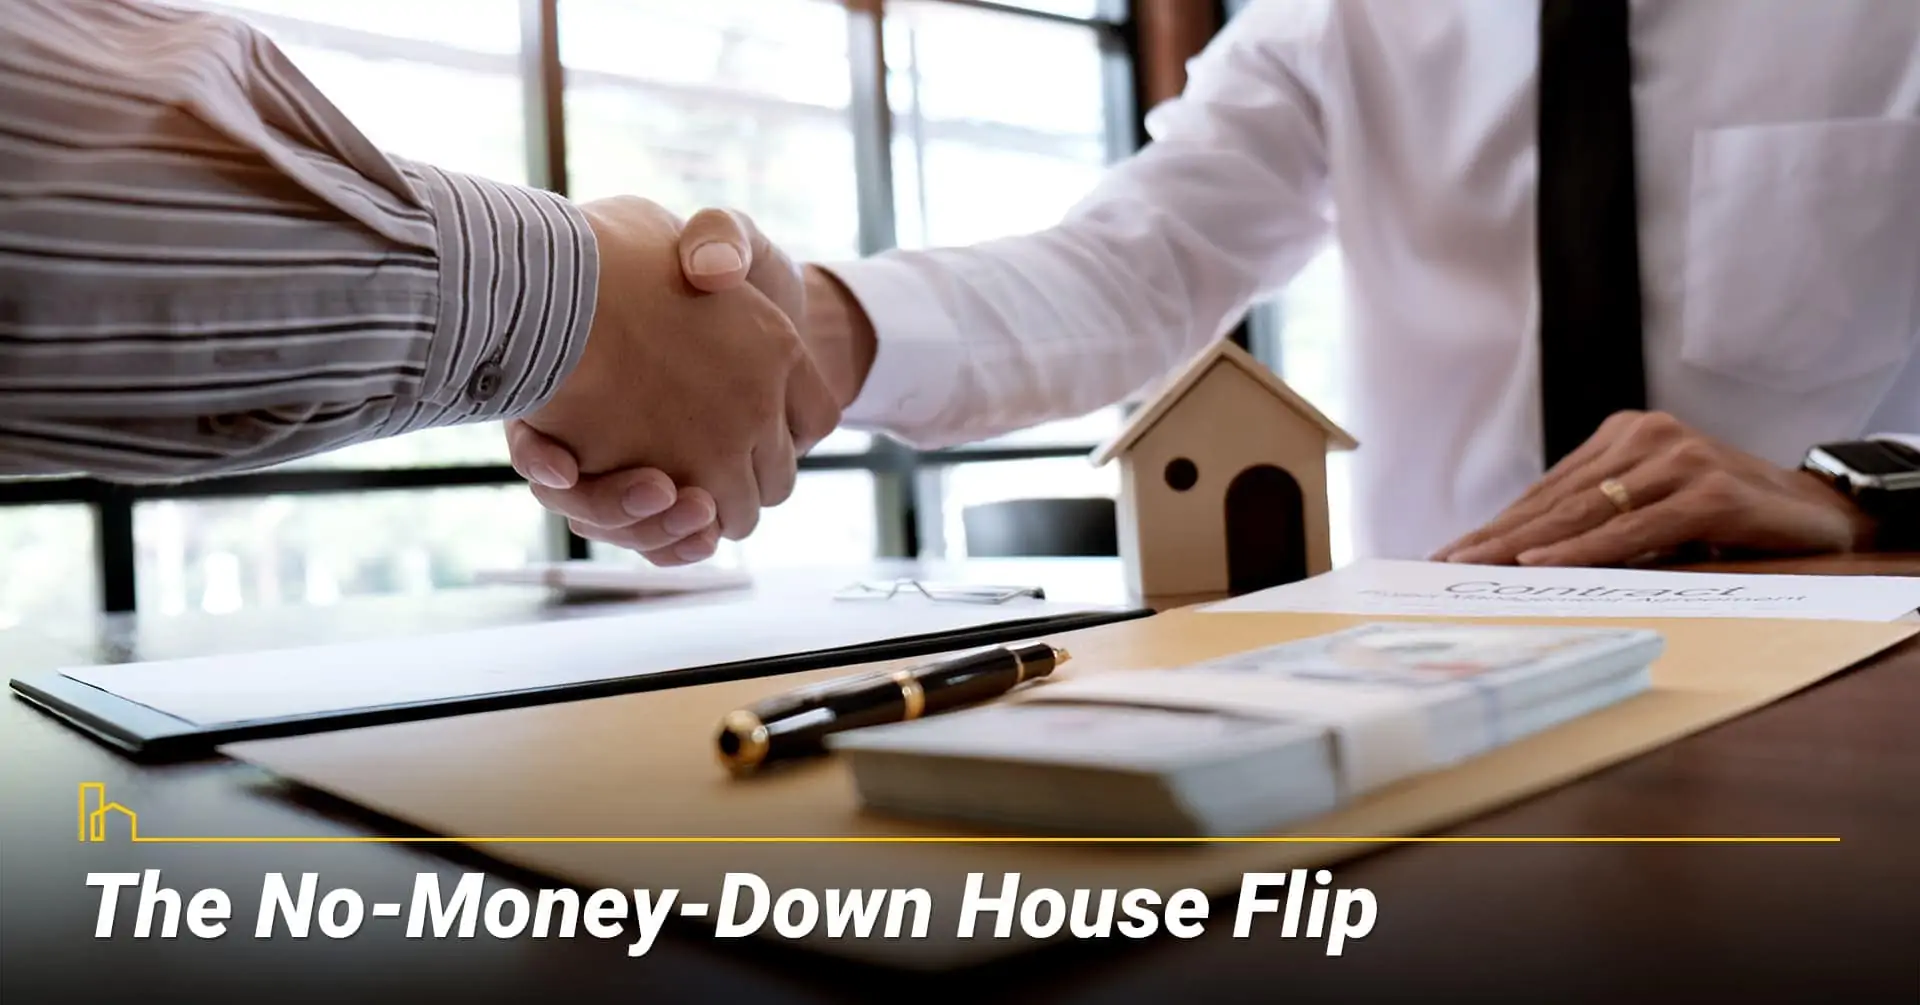 The No-Money-Down House Flip, the efficient way to flip a house